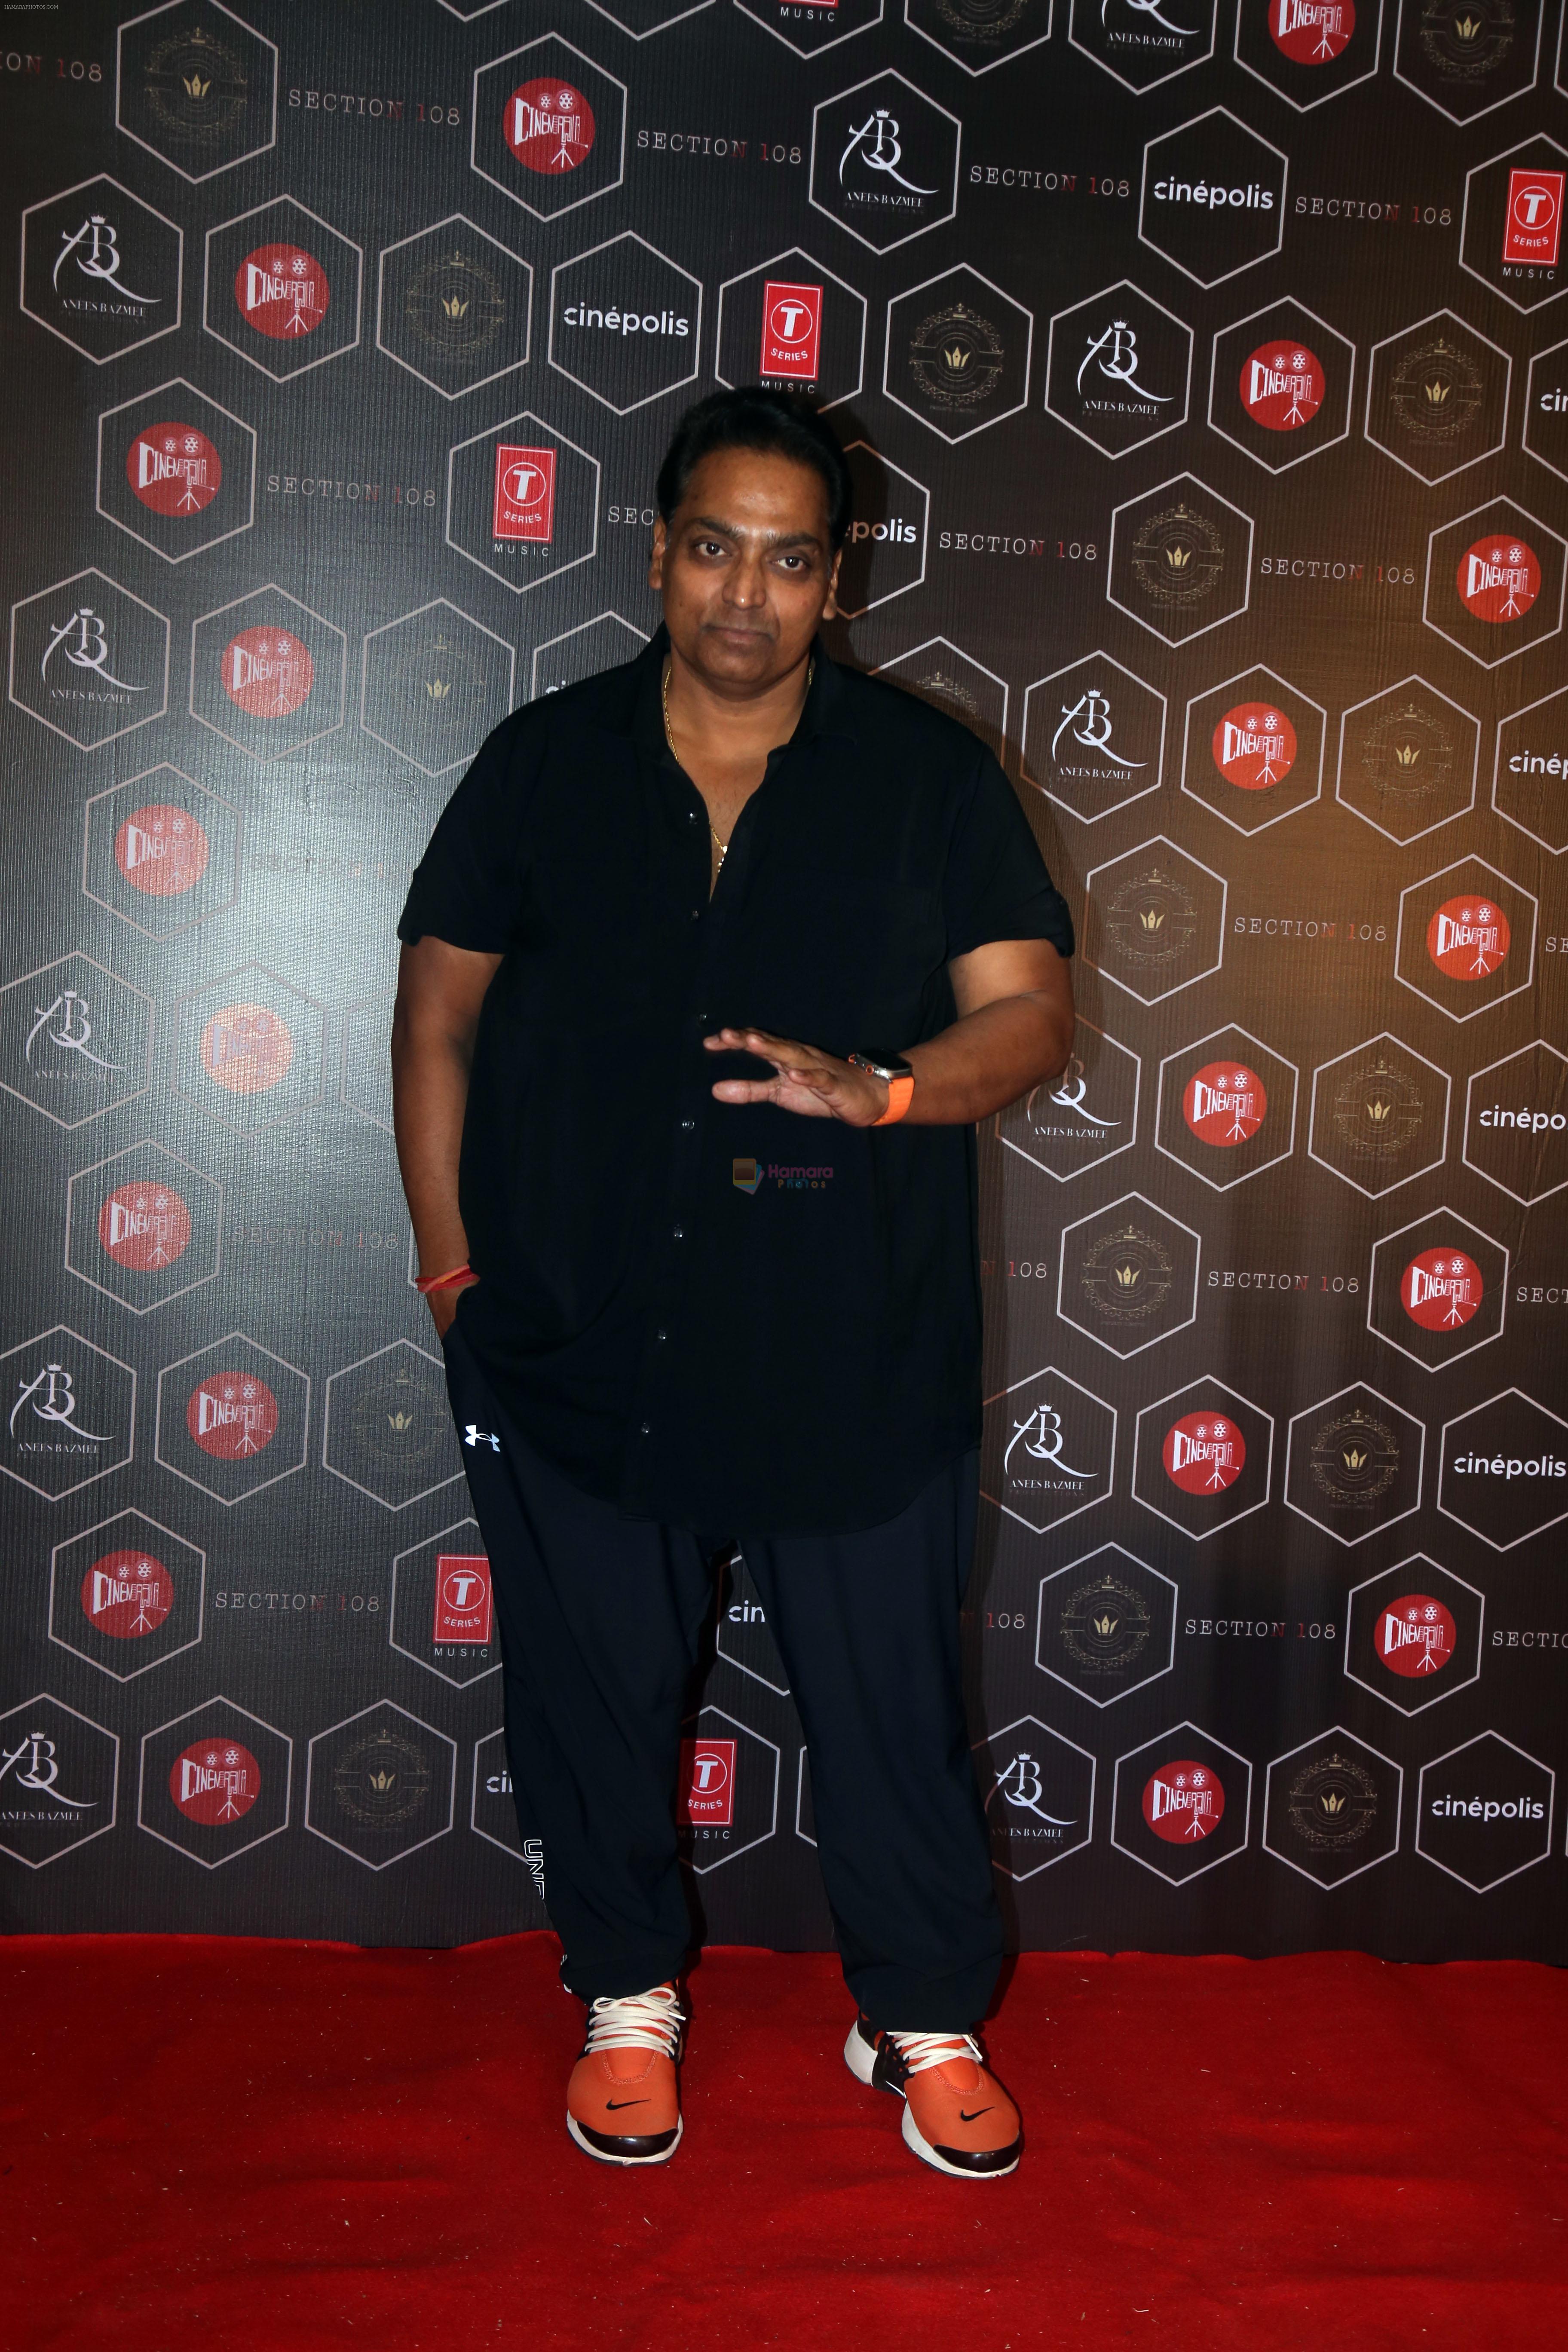 Ganesh Acharya at the launch of film Section 108 Teaser on 27th August 2023